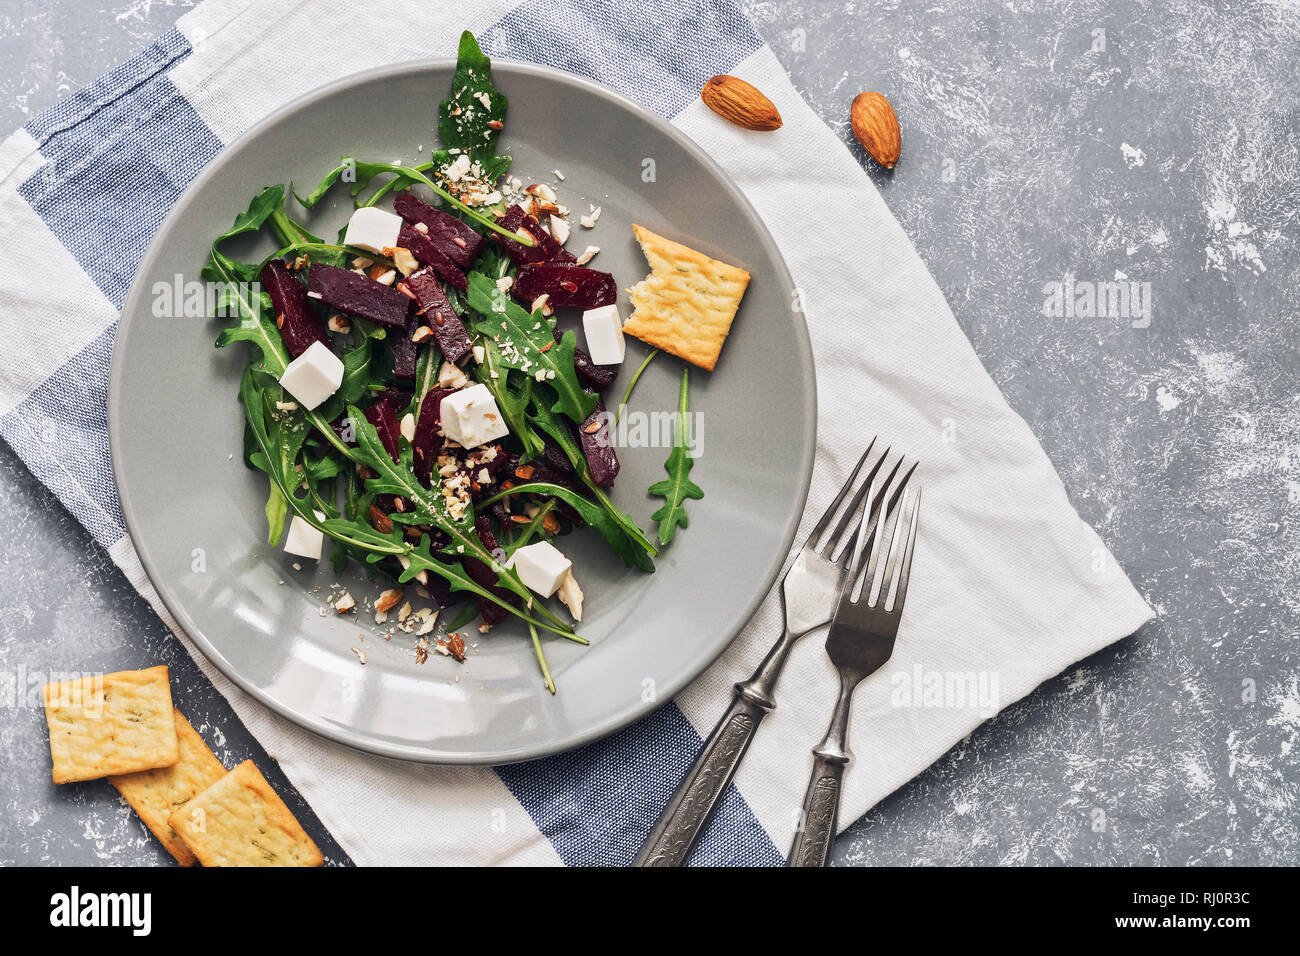 Vegan diet salad with beetroot, arugula, feta cheese with crackers, gray background. The concept of healthy eating. Top view, flat lay Stock Photo